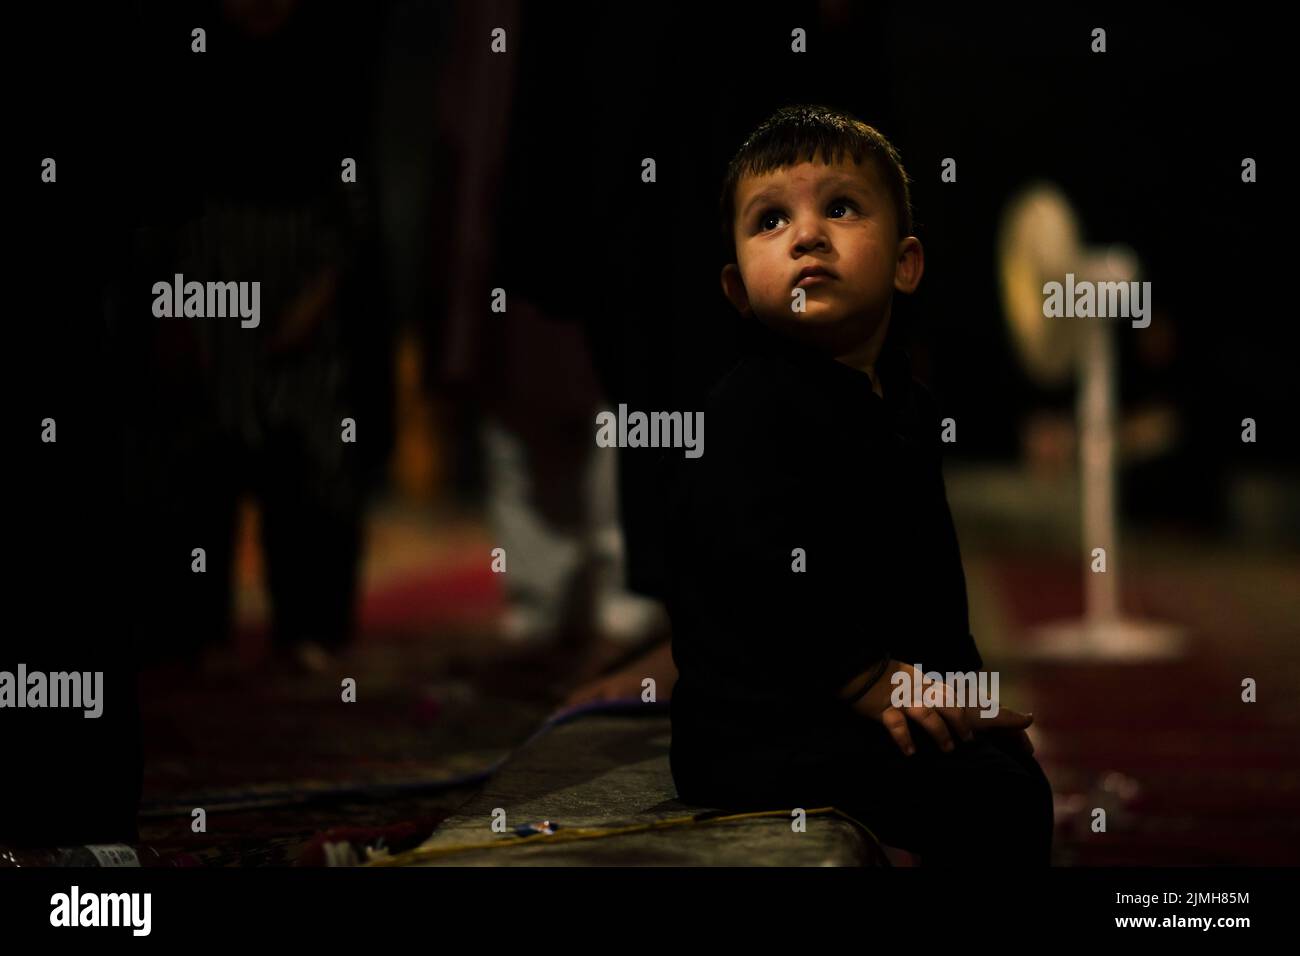 A Shia Muslim kid looks on during a religious procession on the 7th day of Muharram. Muharram is the first month of Islam. It is one of the holiest months on the Islamic calendar. Shia Muslims commemorate Muharram as a month of mourning in remembrance of the martyrdom of the Islamic Prophet Muhammad's grandson Imam Hussain, who was killed on Ashura (10th day of Muharram) in the battle of Karbala in 680 A.D. Stock Photo